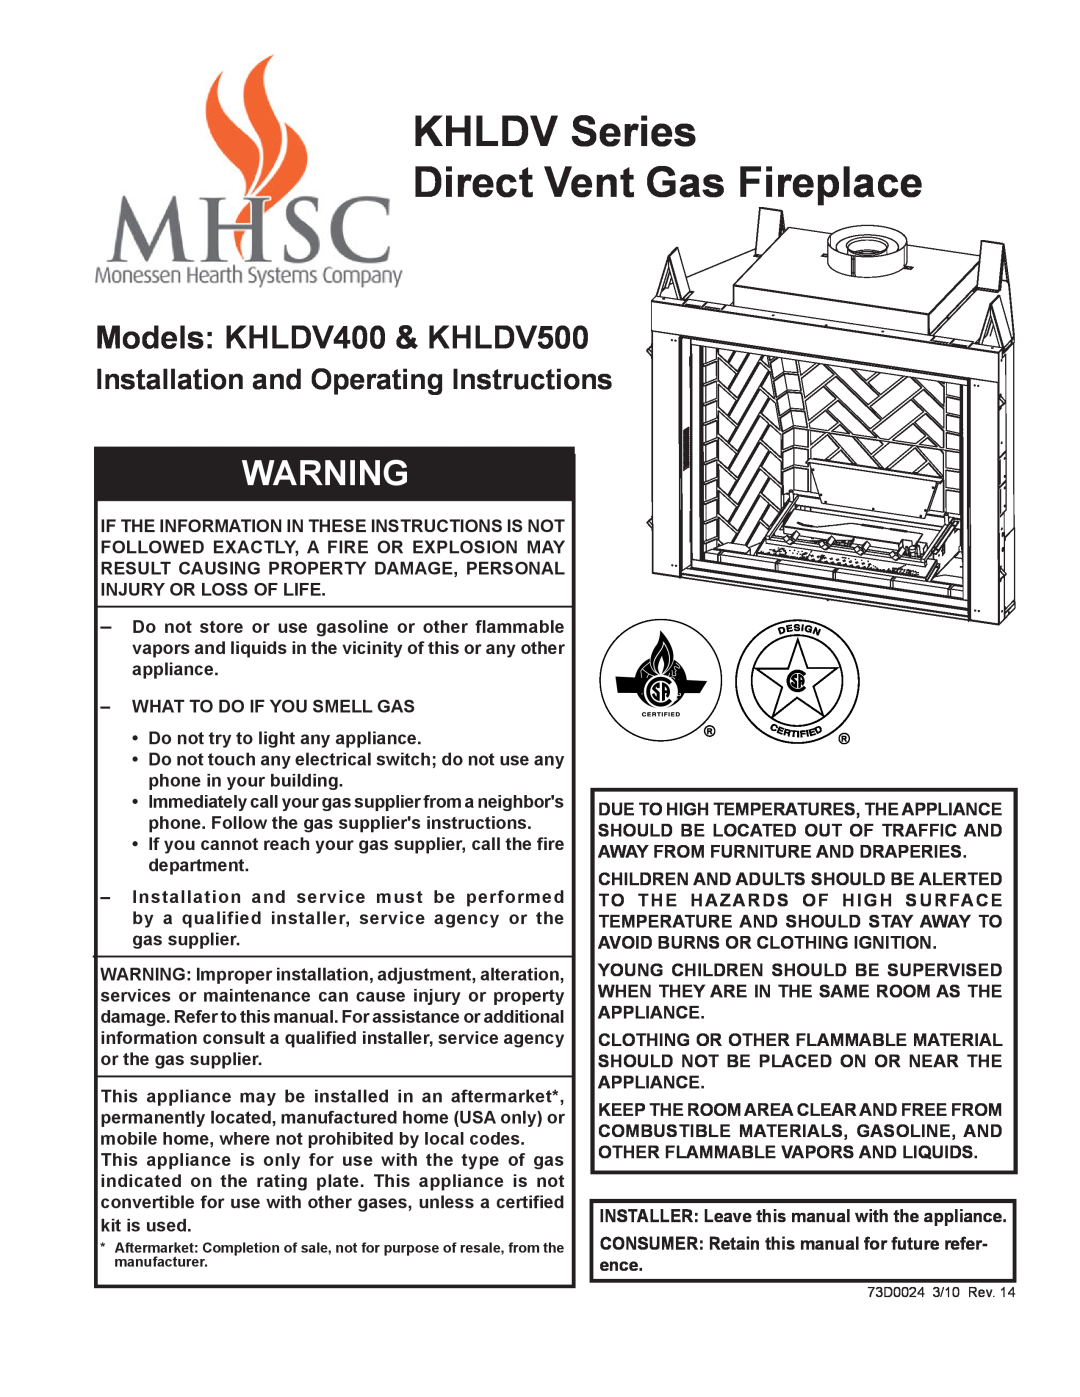 Monessen Hearth specifications KHLDV400 Covington Direct Vent, Product Specifications 